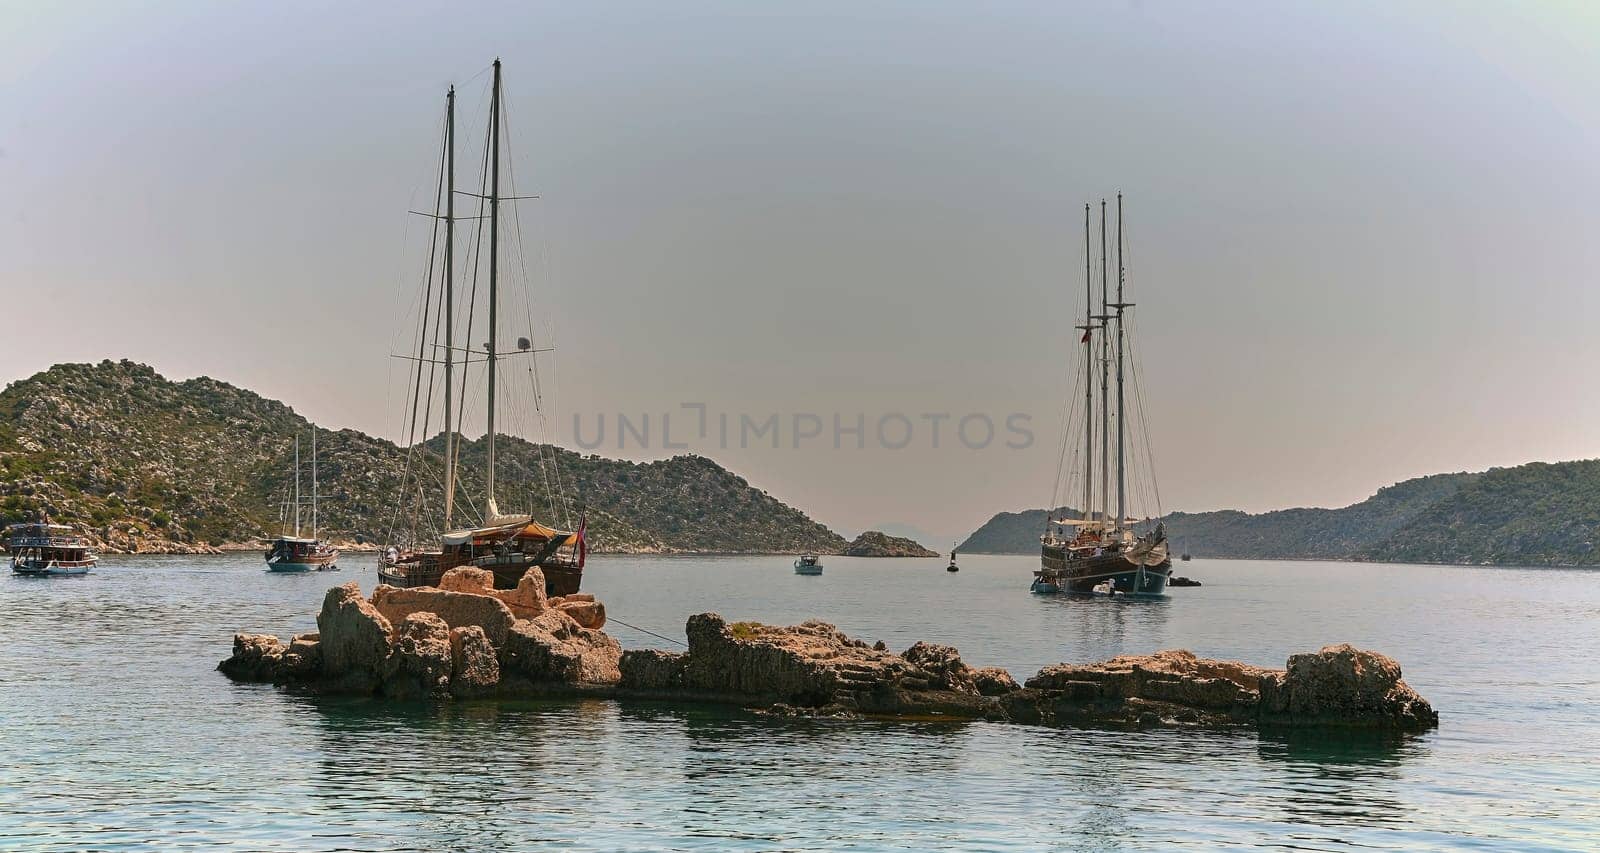 Wooden sailing boat in calm sea with green mountains. Two masts, white sails. Clear blue-green water, blue sky, white clouds. Marina with more boats. Great for travel brochure.